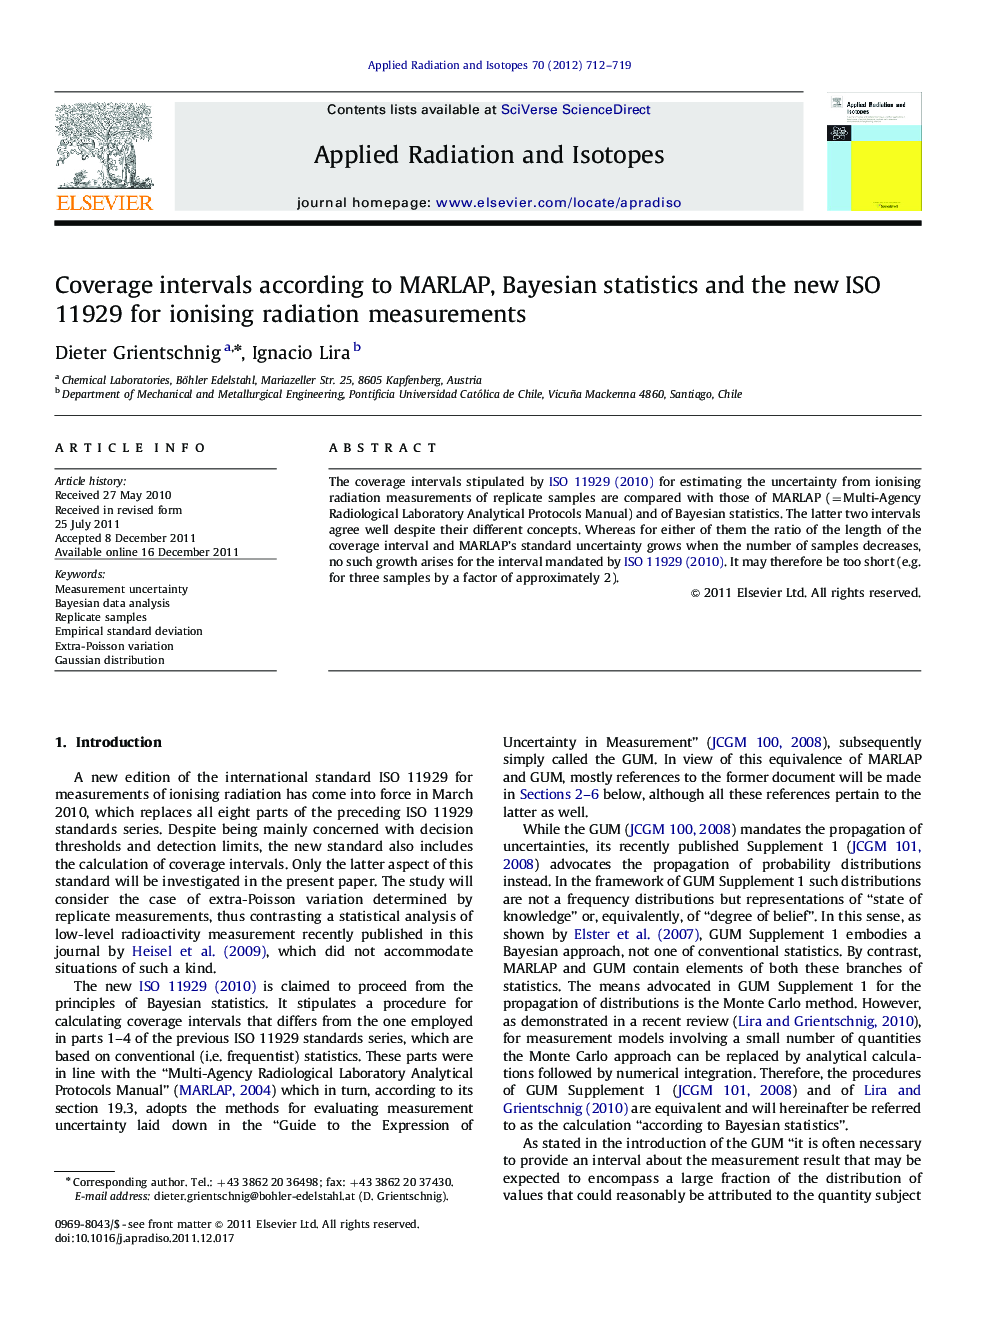 Coverage intervals according to MARLAP, Bayesian statistics and the new ISO 11929 for ionising radiation measurements